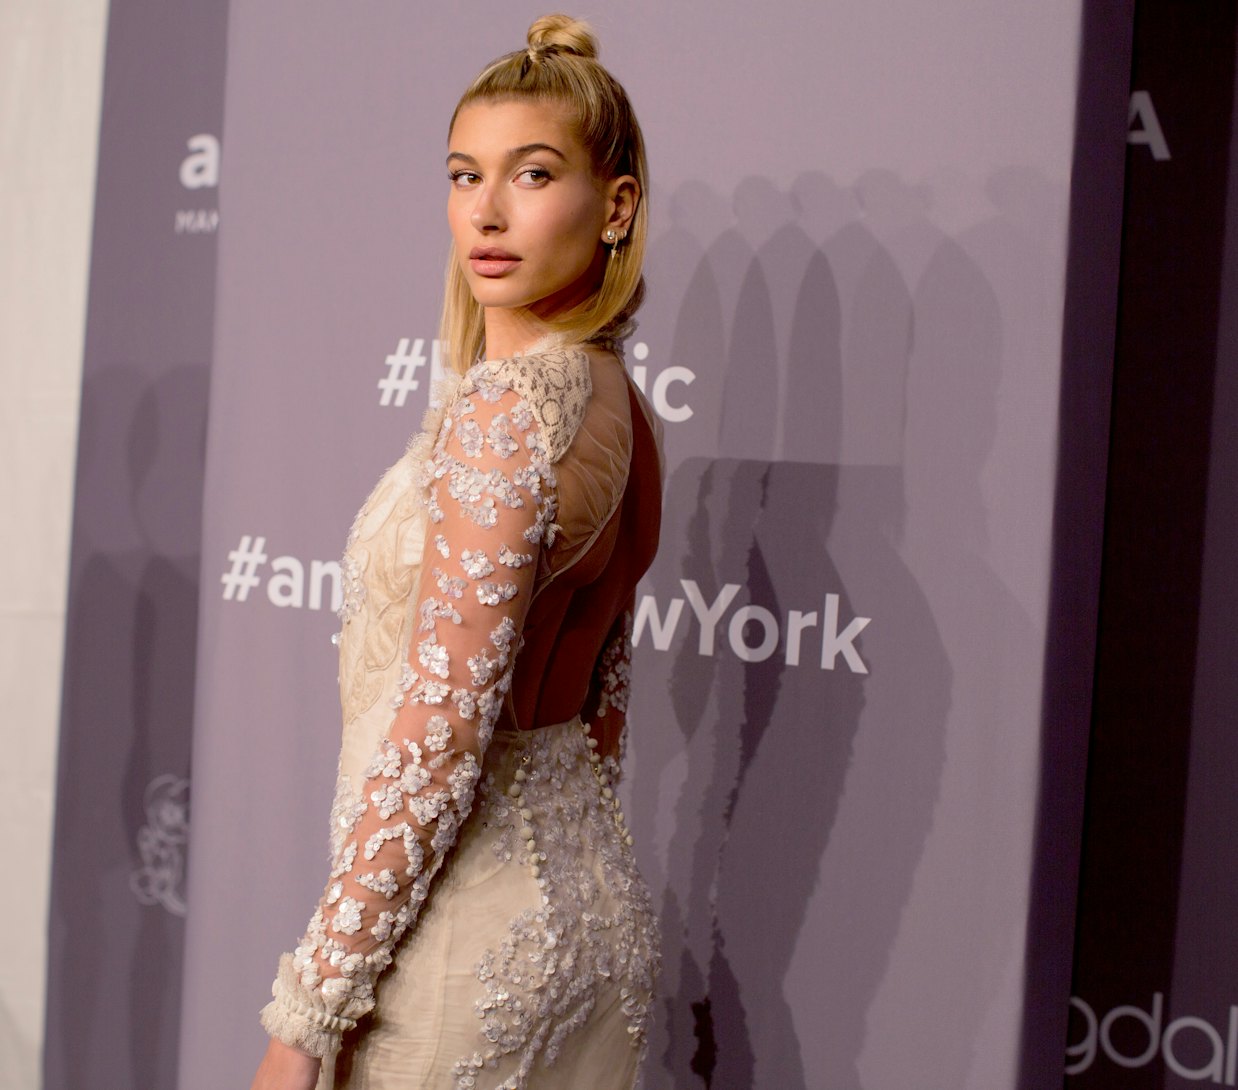 Hailey Bieber's Best Red Carpet Fashion Moments